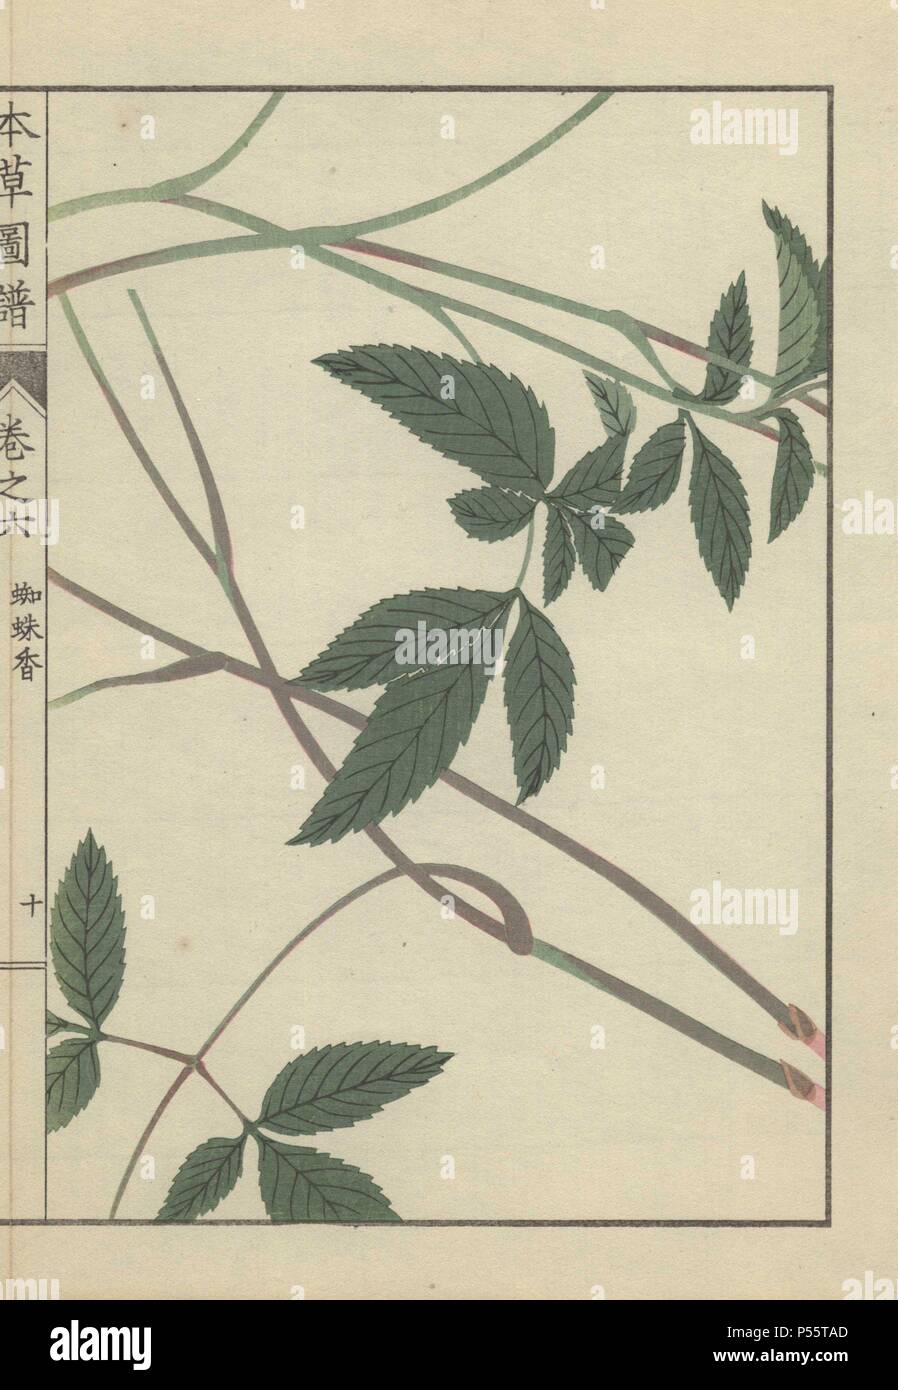 Leaves and stems of burnet saxifrage. Pimpinella calycina. Chichukou. Colour-printed woodblock engraving by Kan'en Iwasaki from 'Honzo Zufu,' an Illustrated Guide to Medicinal Plants, 1884. Iwasaki (1786-1842) was a Japanese botanist, entomologist and zoologist. He was one of the first Japanese botanists to incorporate western knowledge into his studies. Stock Photo